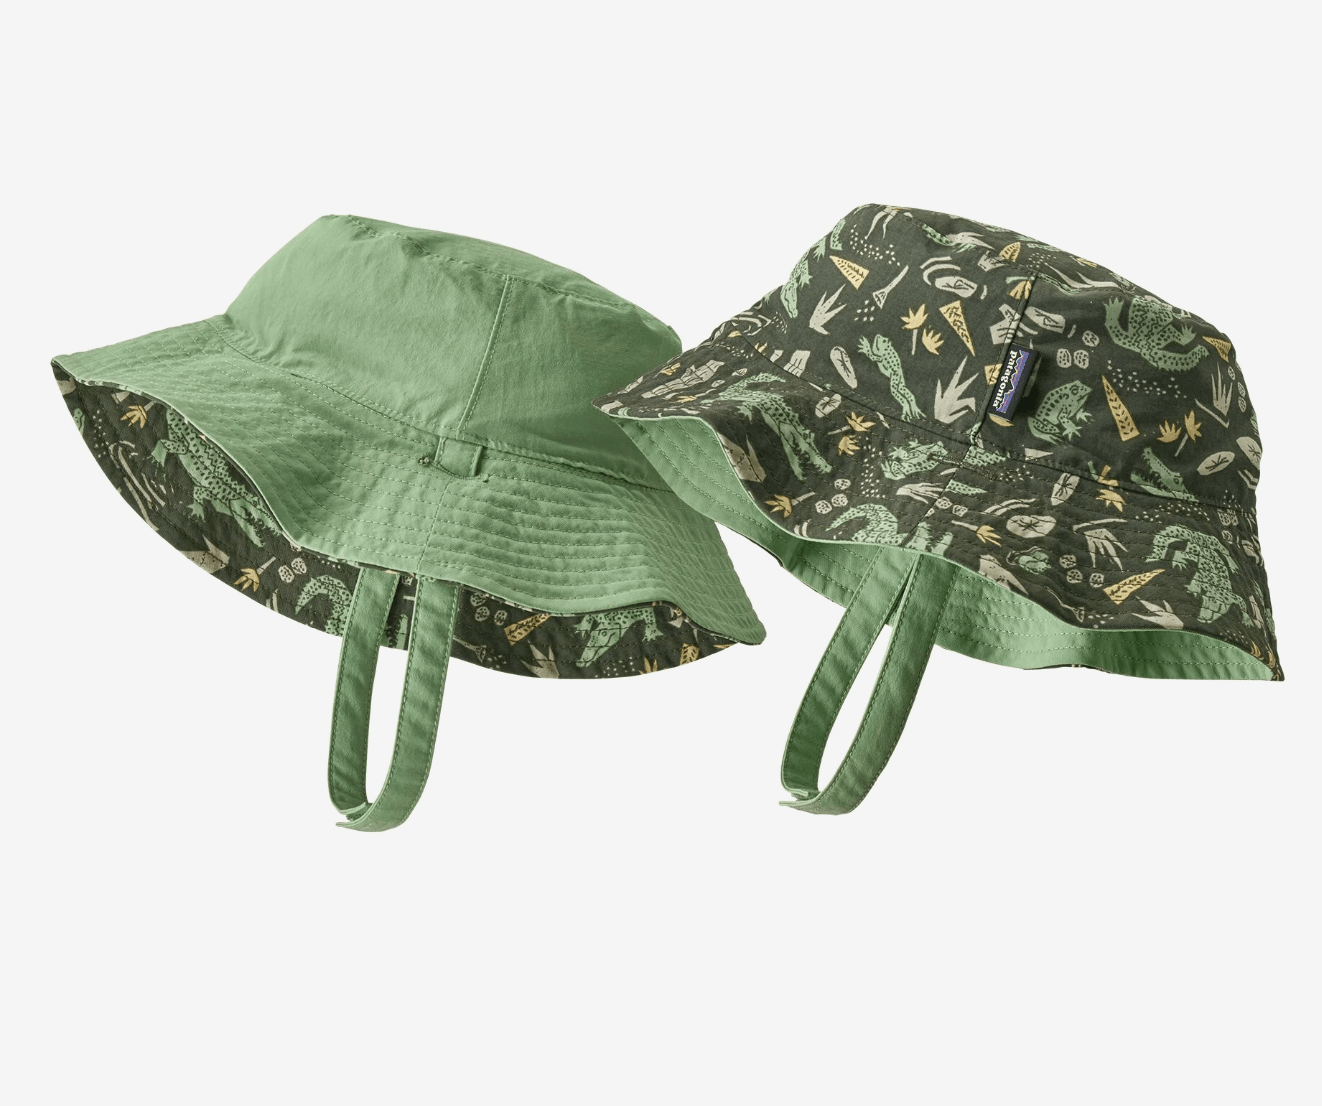 Bucket Hats Made a Small but Significant Comeback This Summer